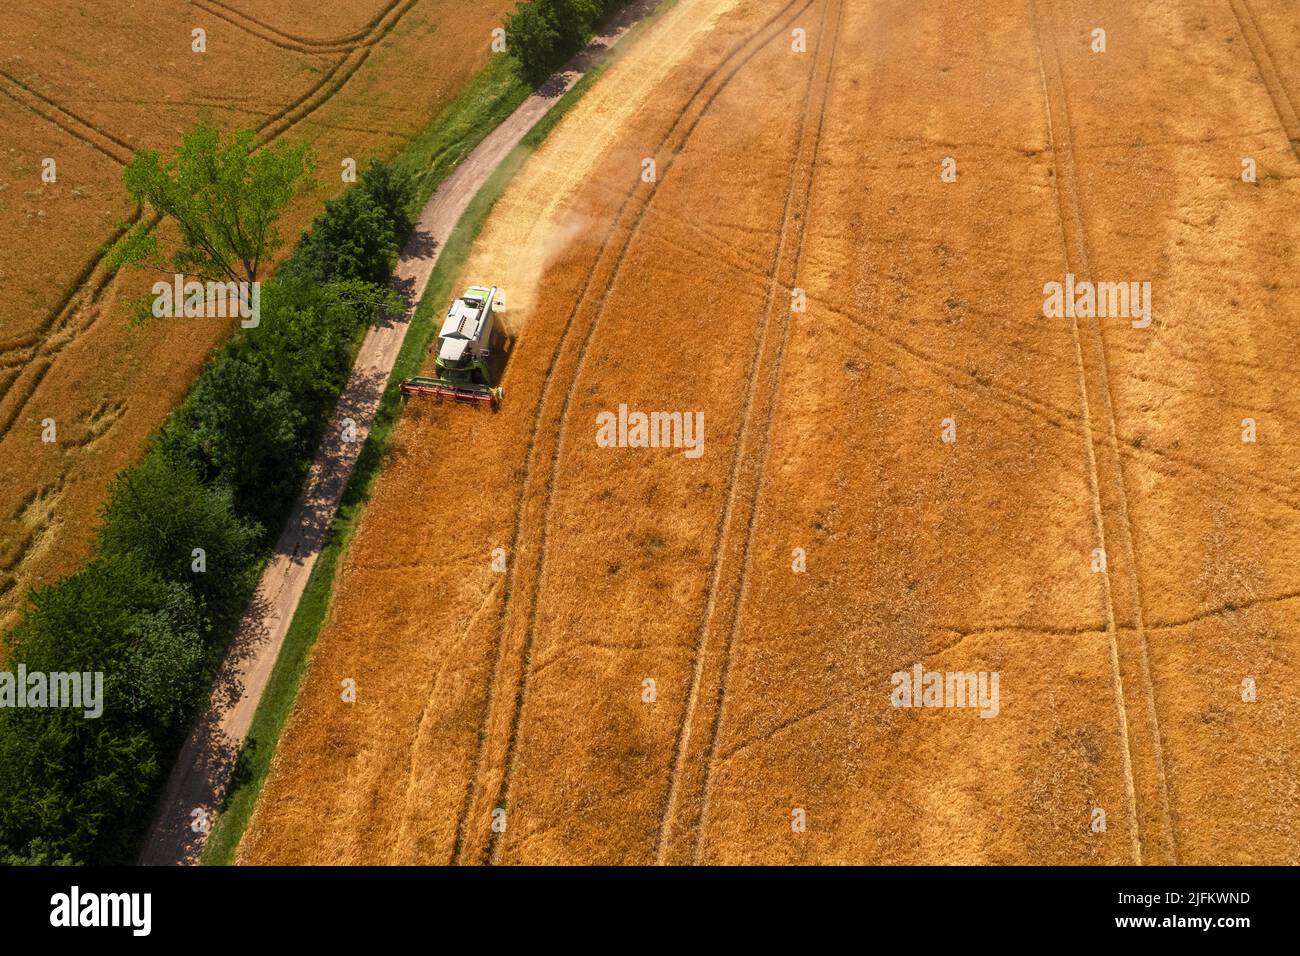 Aerial view of a combine harvester at work during harvest time. Cereal, grain shortage, high trading prices, stockpiling. Agricultural background. Stock Photo